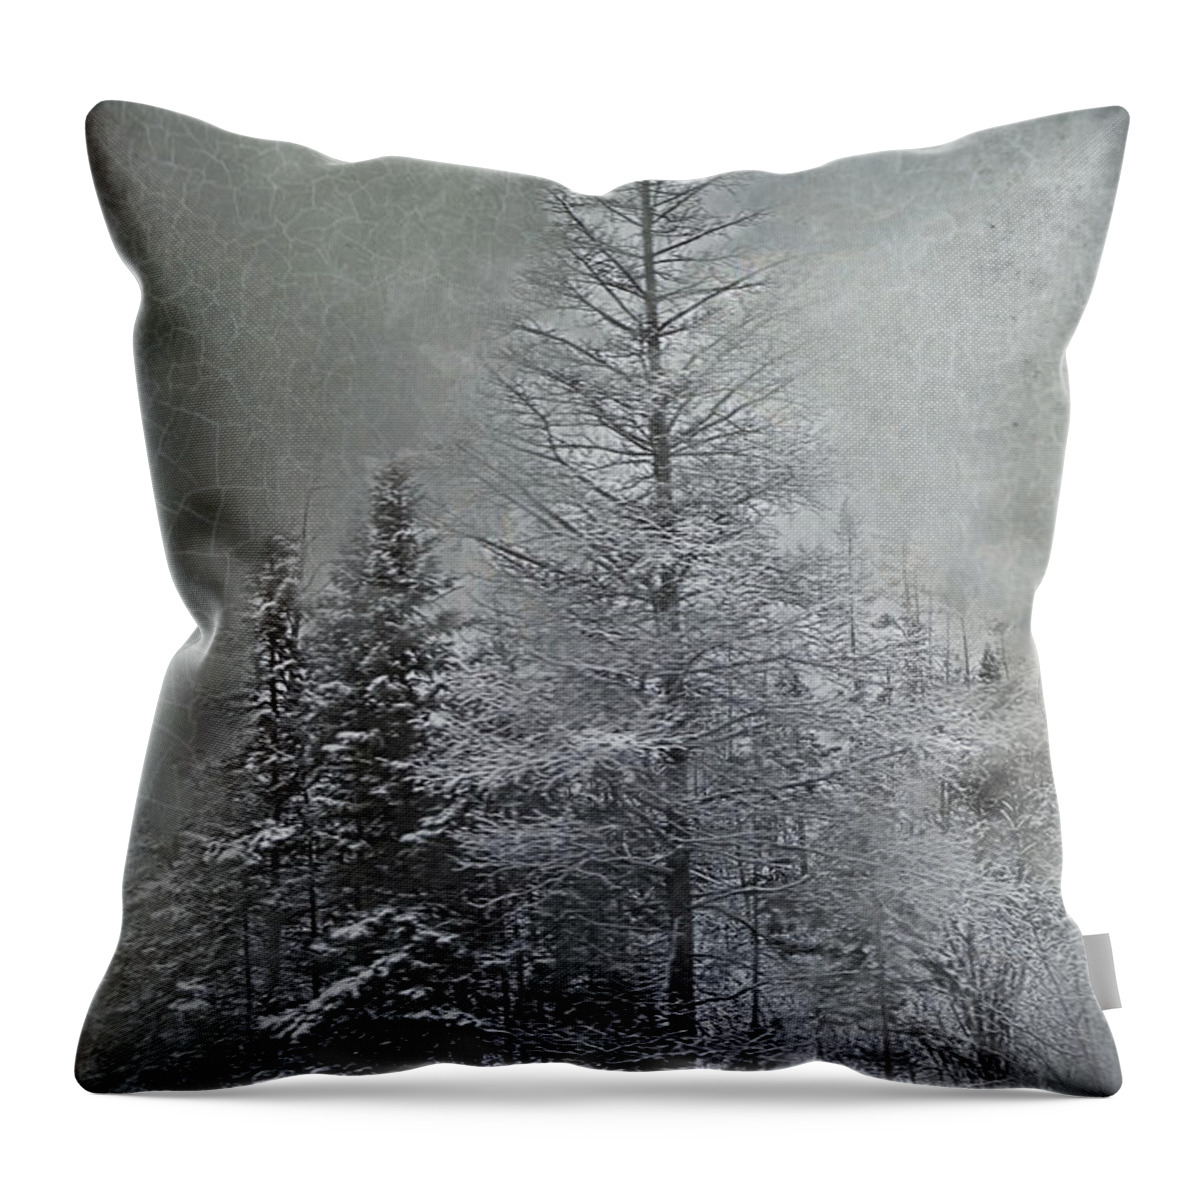 Carrier Throw Pillow featuring the photograph Mackinaw Michigan Winter by Evie Carrier